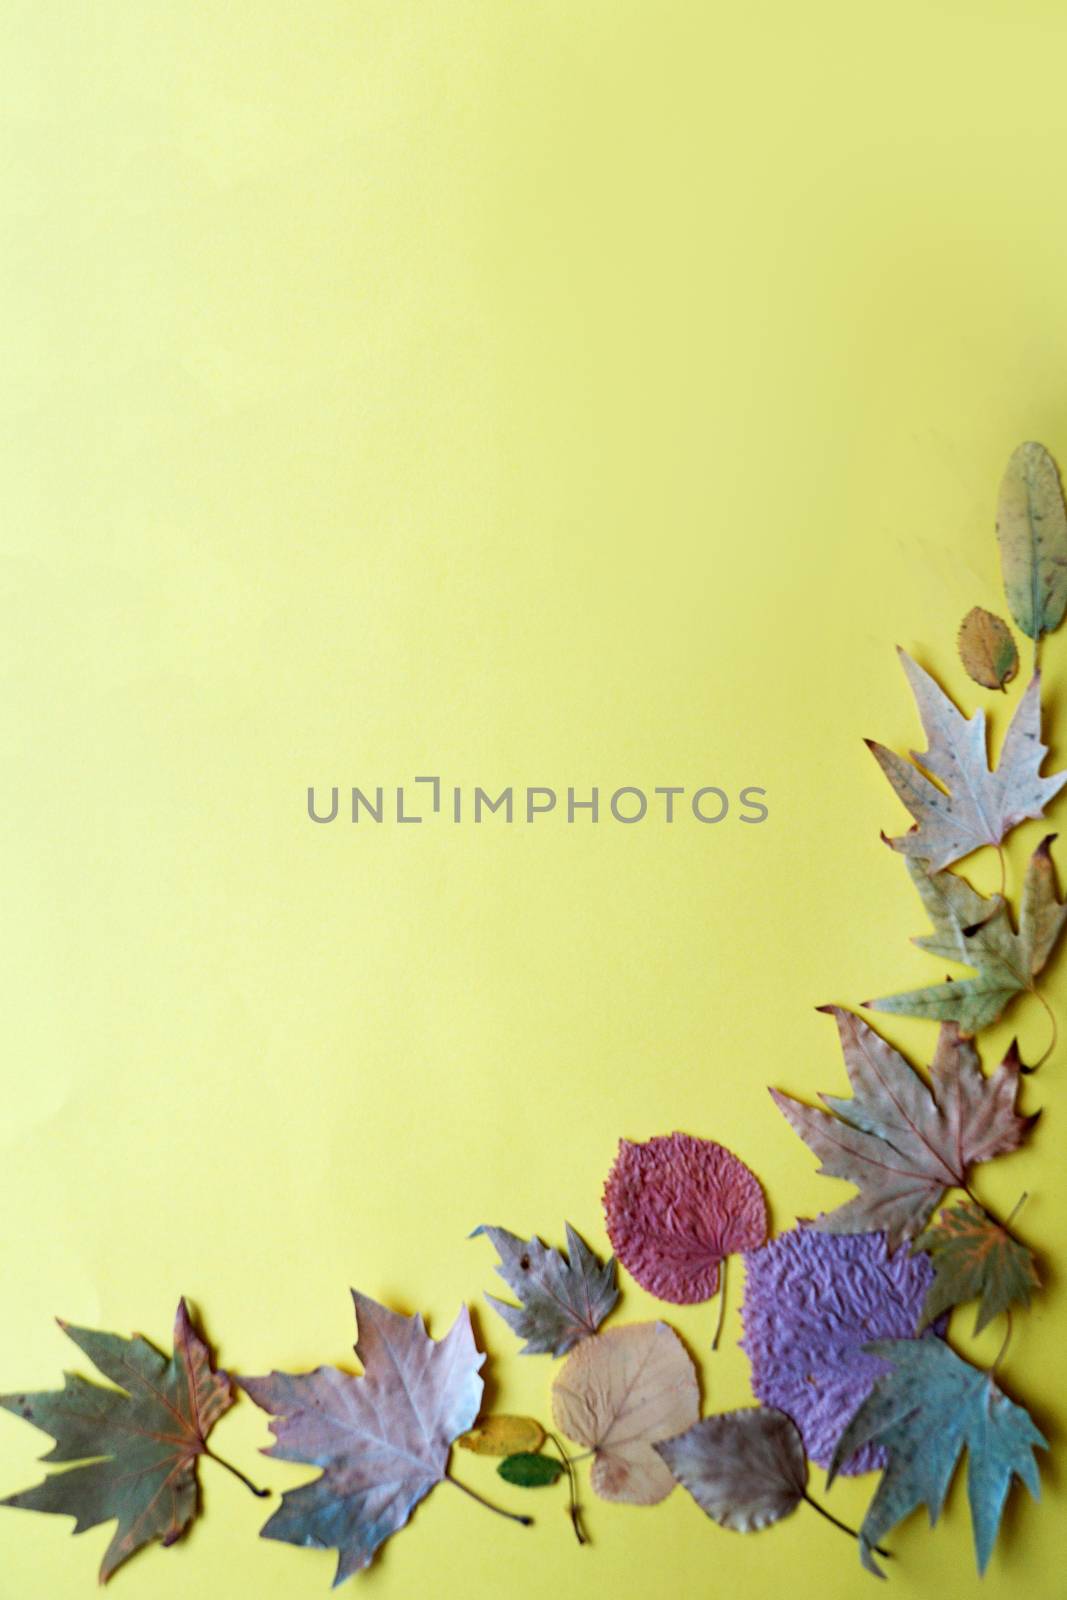 autumn leaves on a yellow background, copy space, mockup blank.